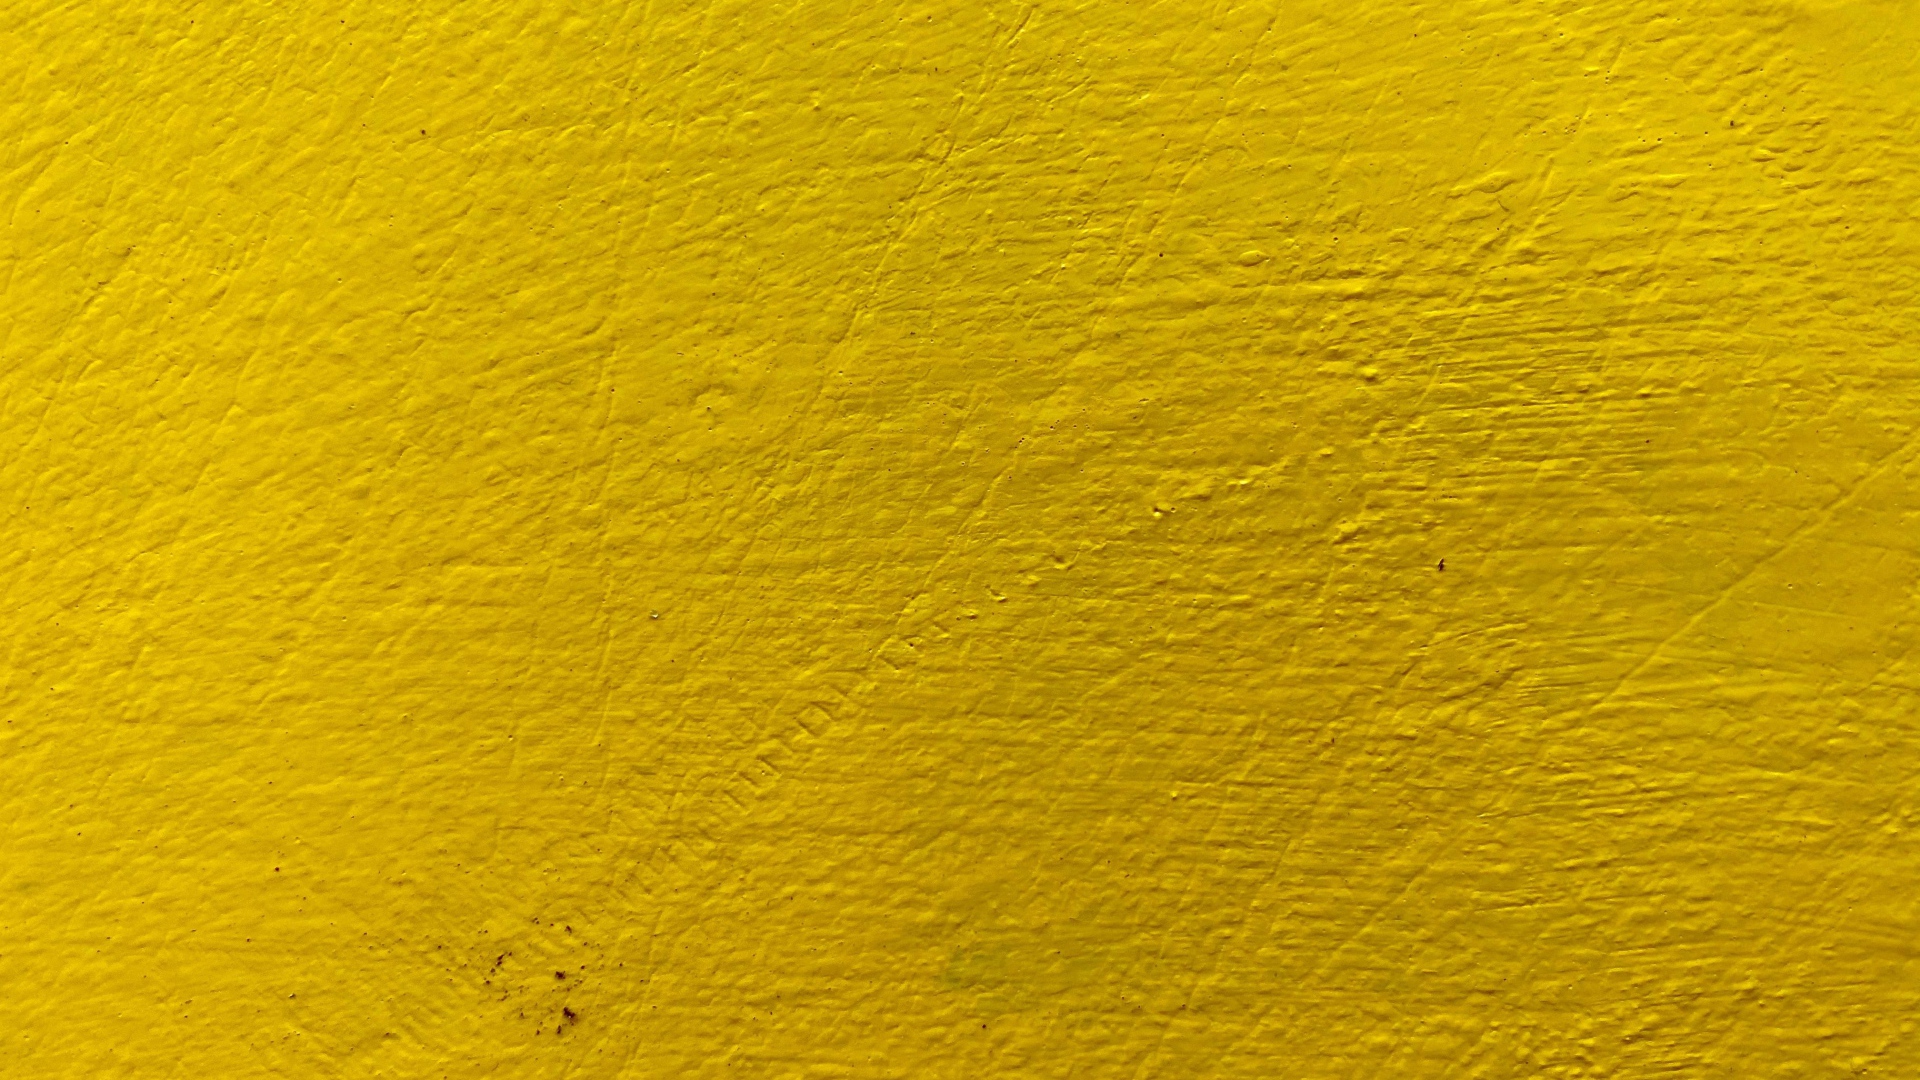 The wall is painted yellow, background